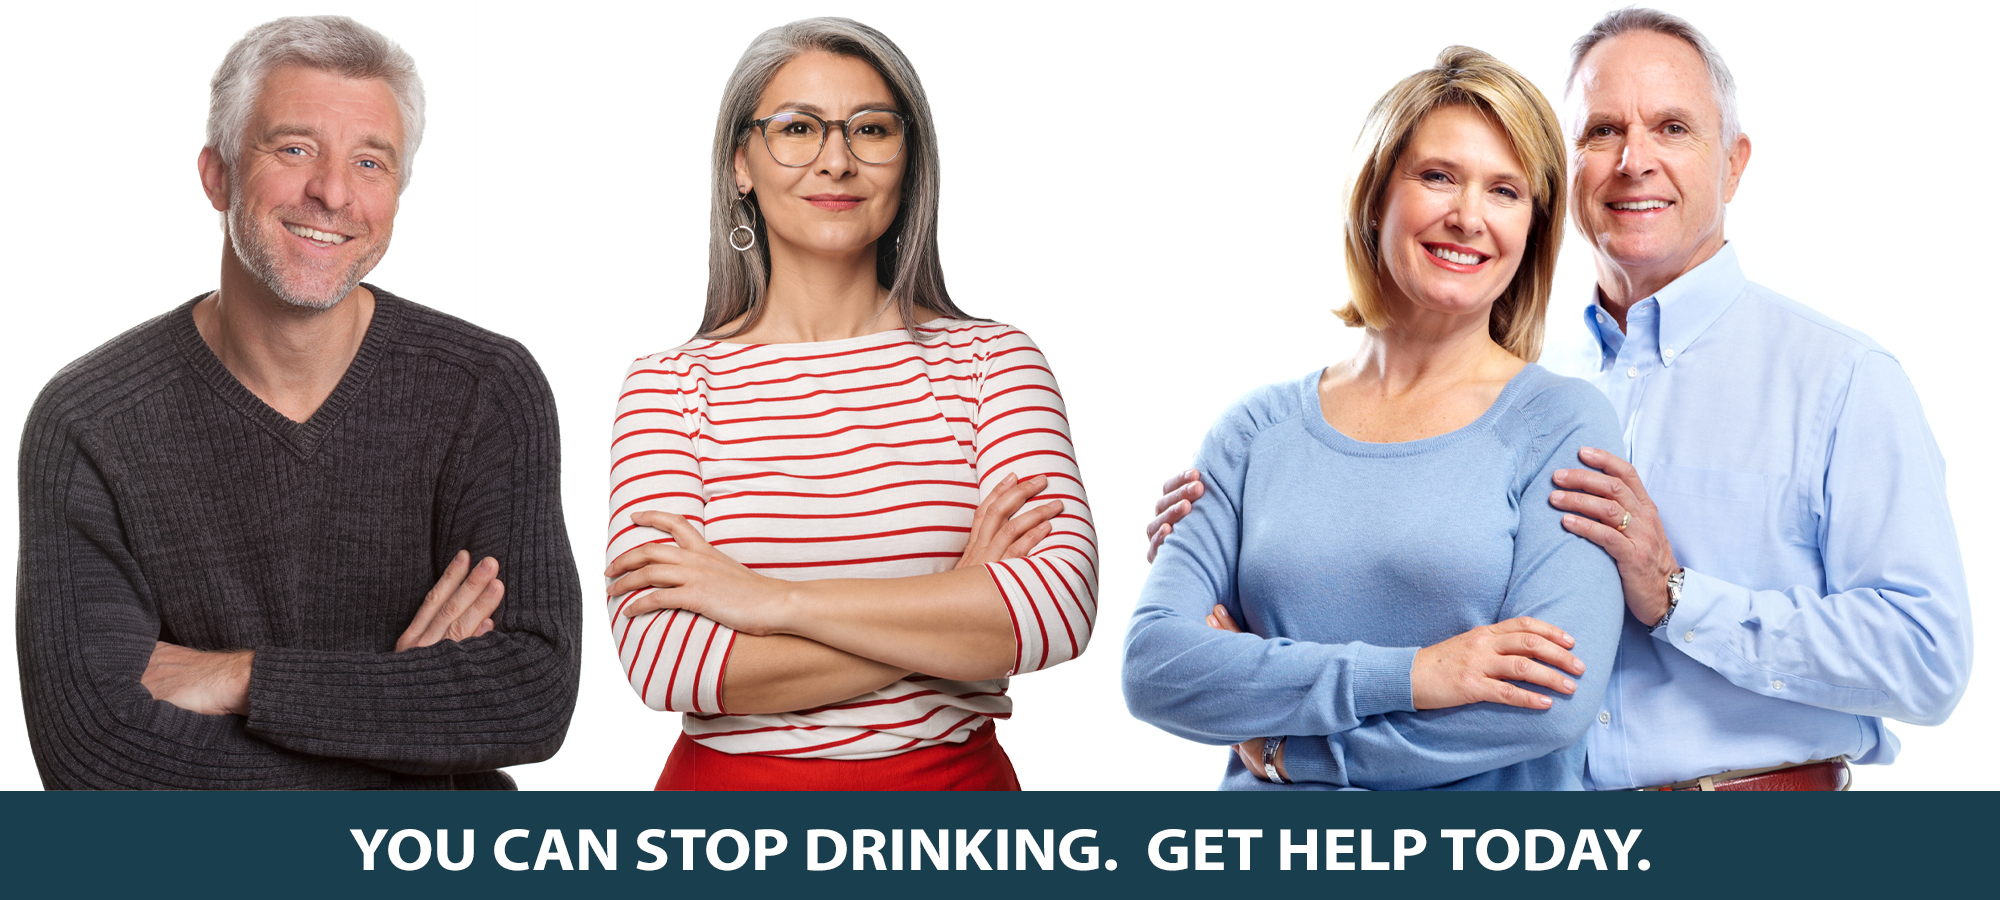 You Can Stop Drinking. Get Help. Now!